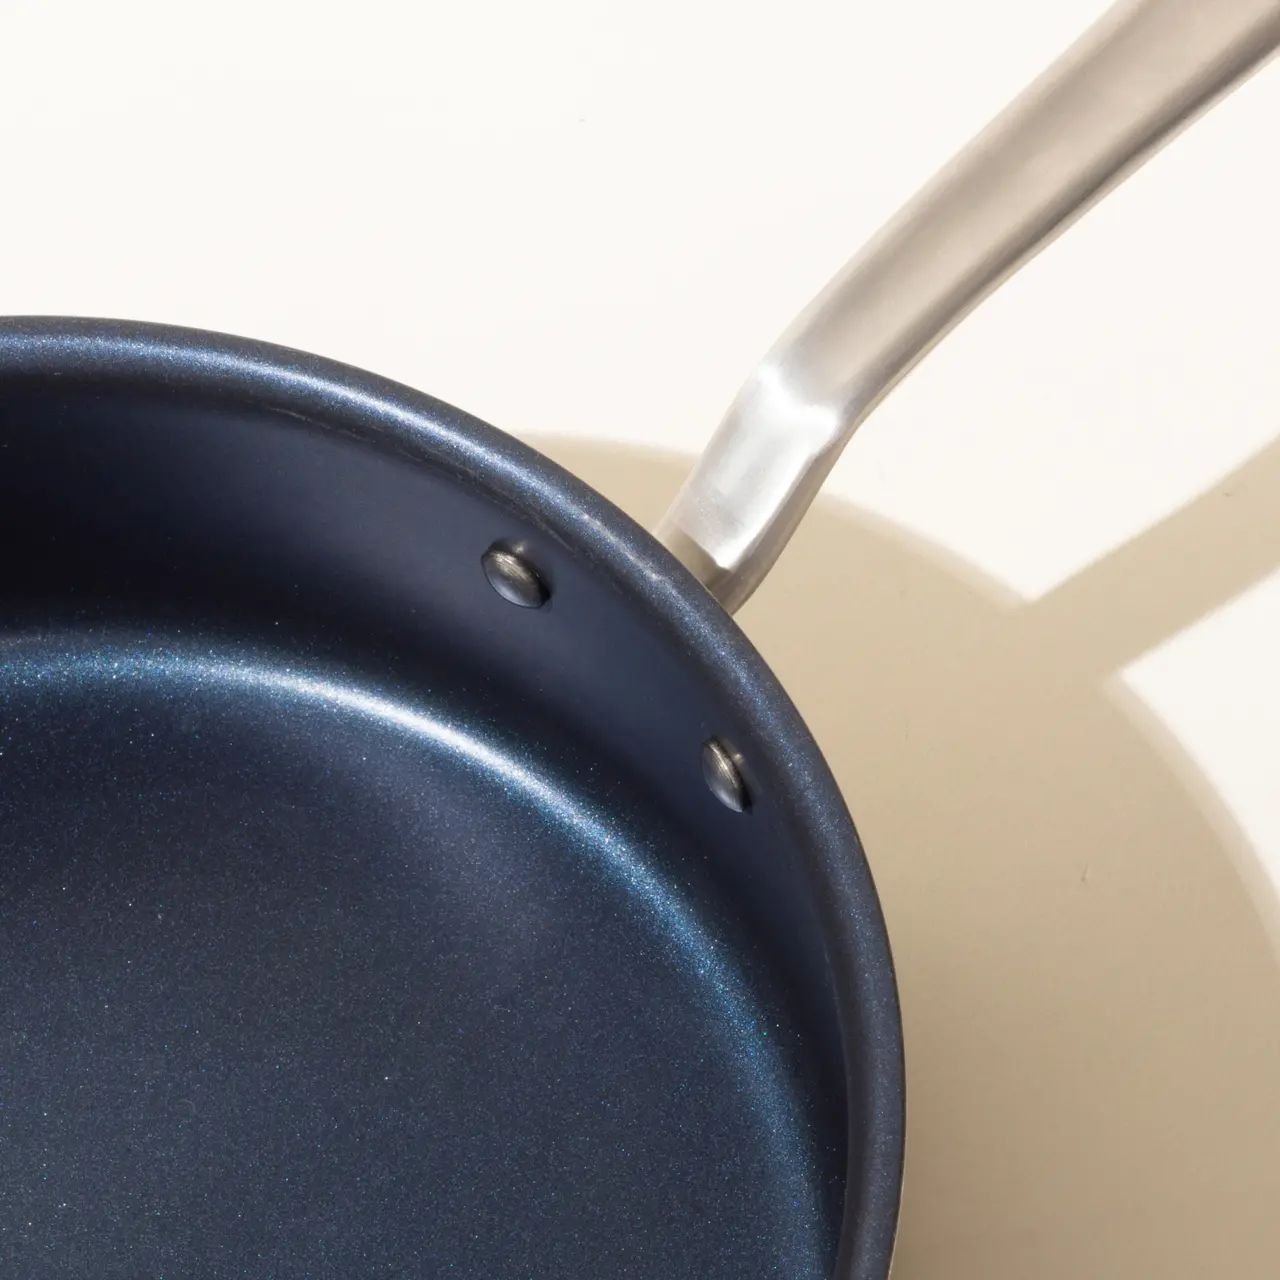 A close-up view of a blue non-stick frying pan with a silver handle, highlighting the attachment point of the handle to the pan.